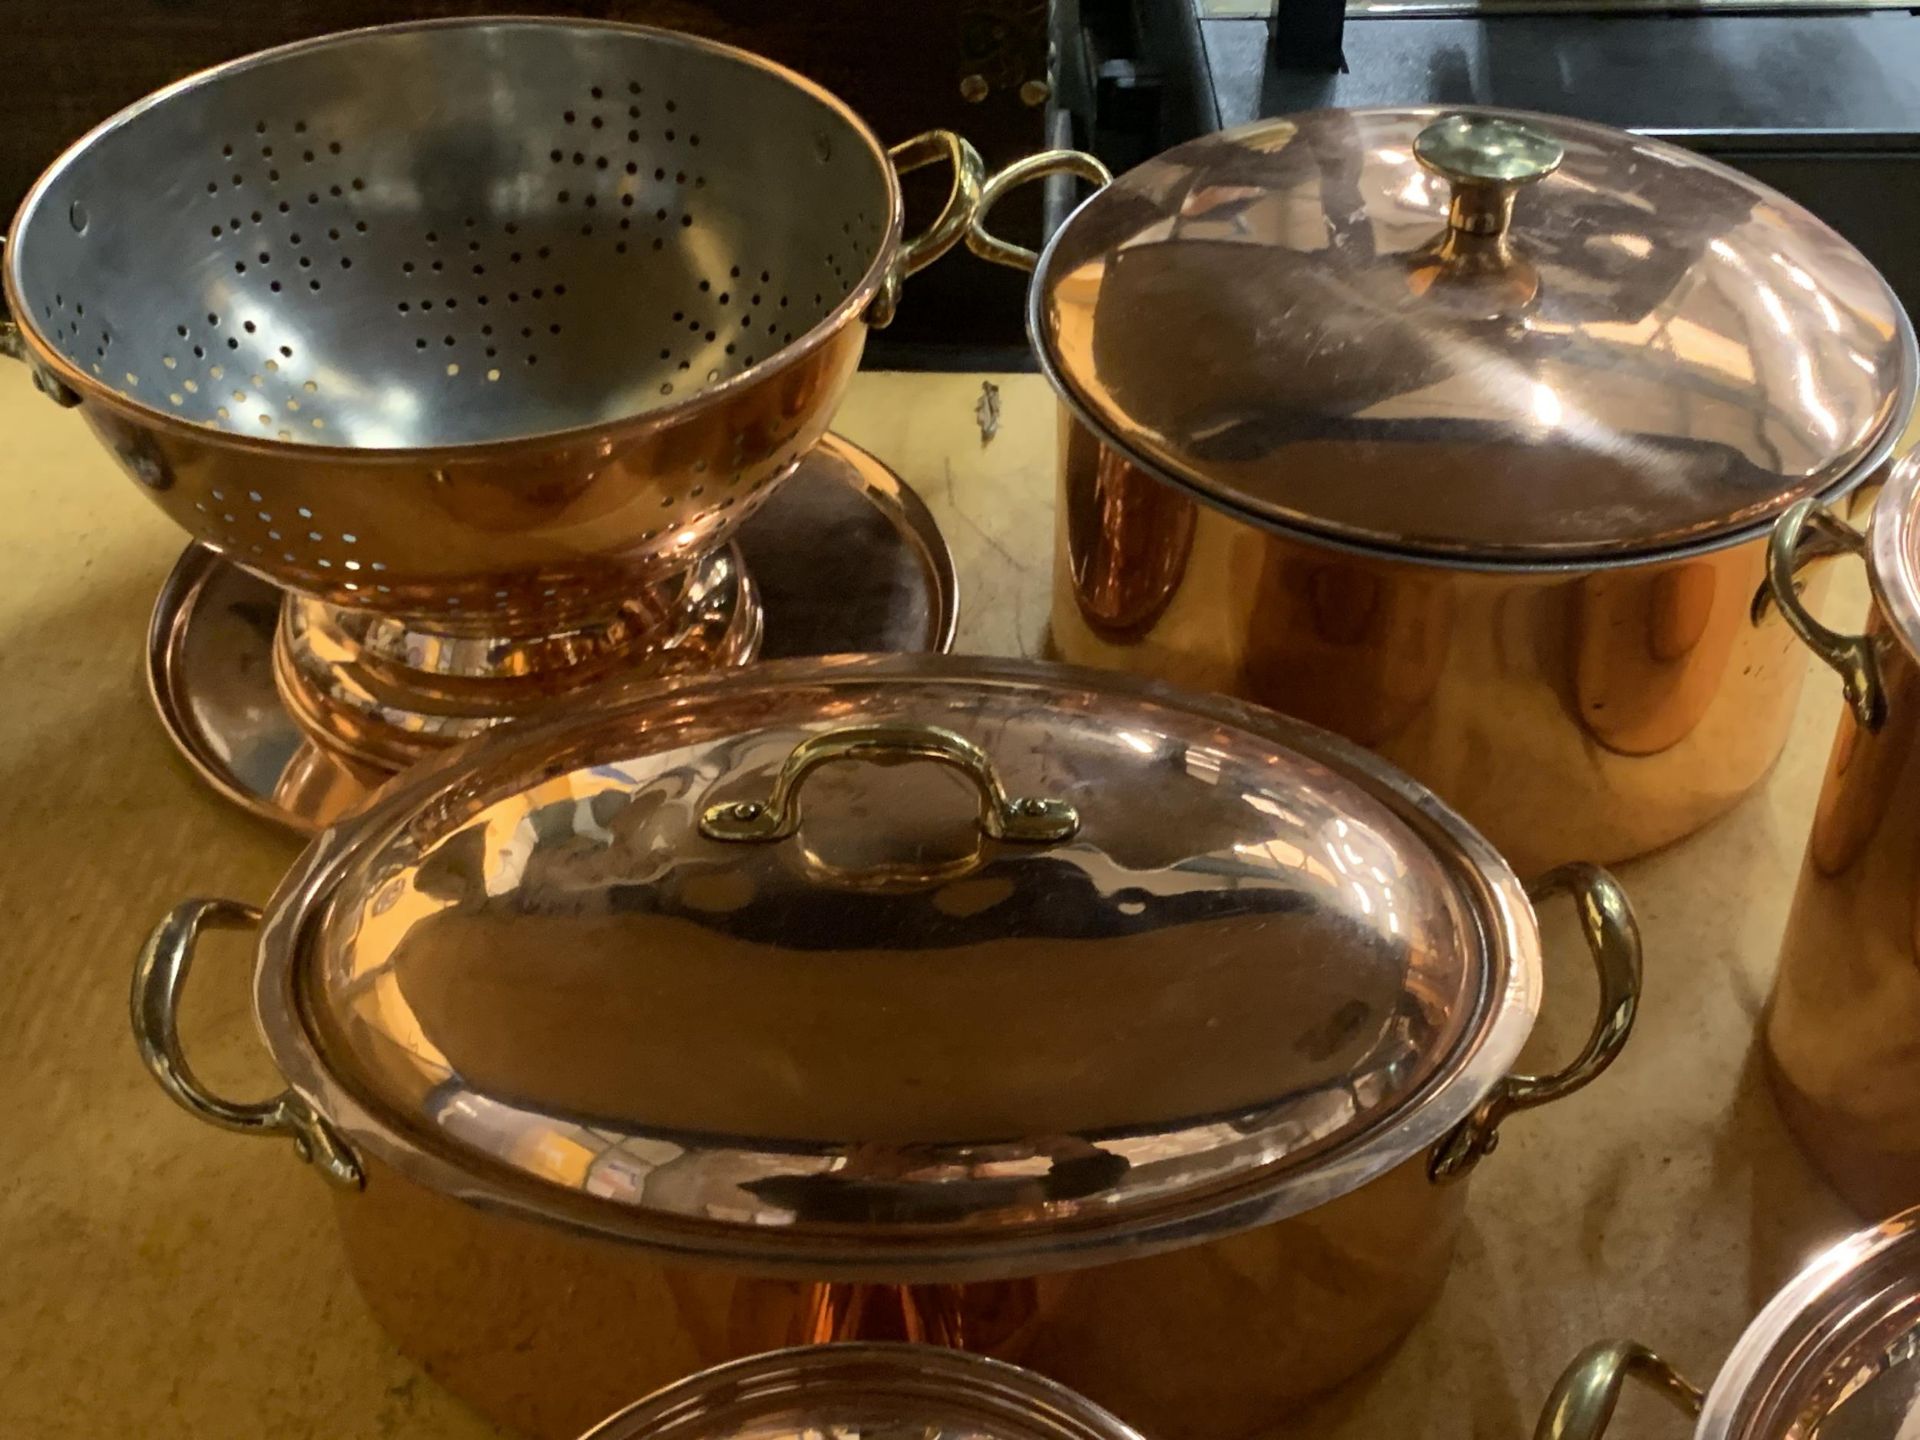 A LARGE QUANTITY OF COPPER COOKING ITEMS TO INCLUDE PANS, A SIEVE, JELLY MOULD, CASSEROLE DISHES, - Image 4 of 5